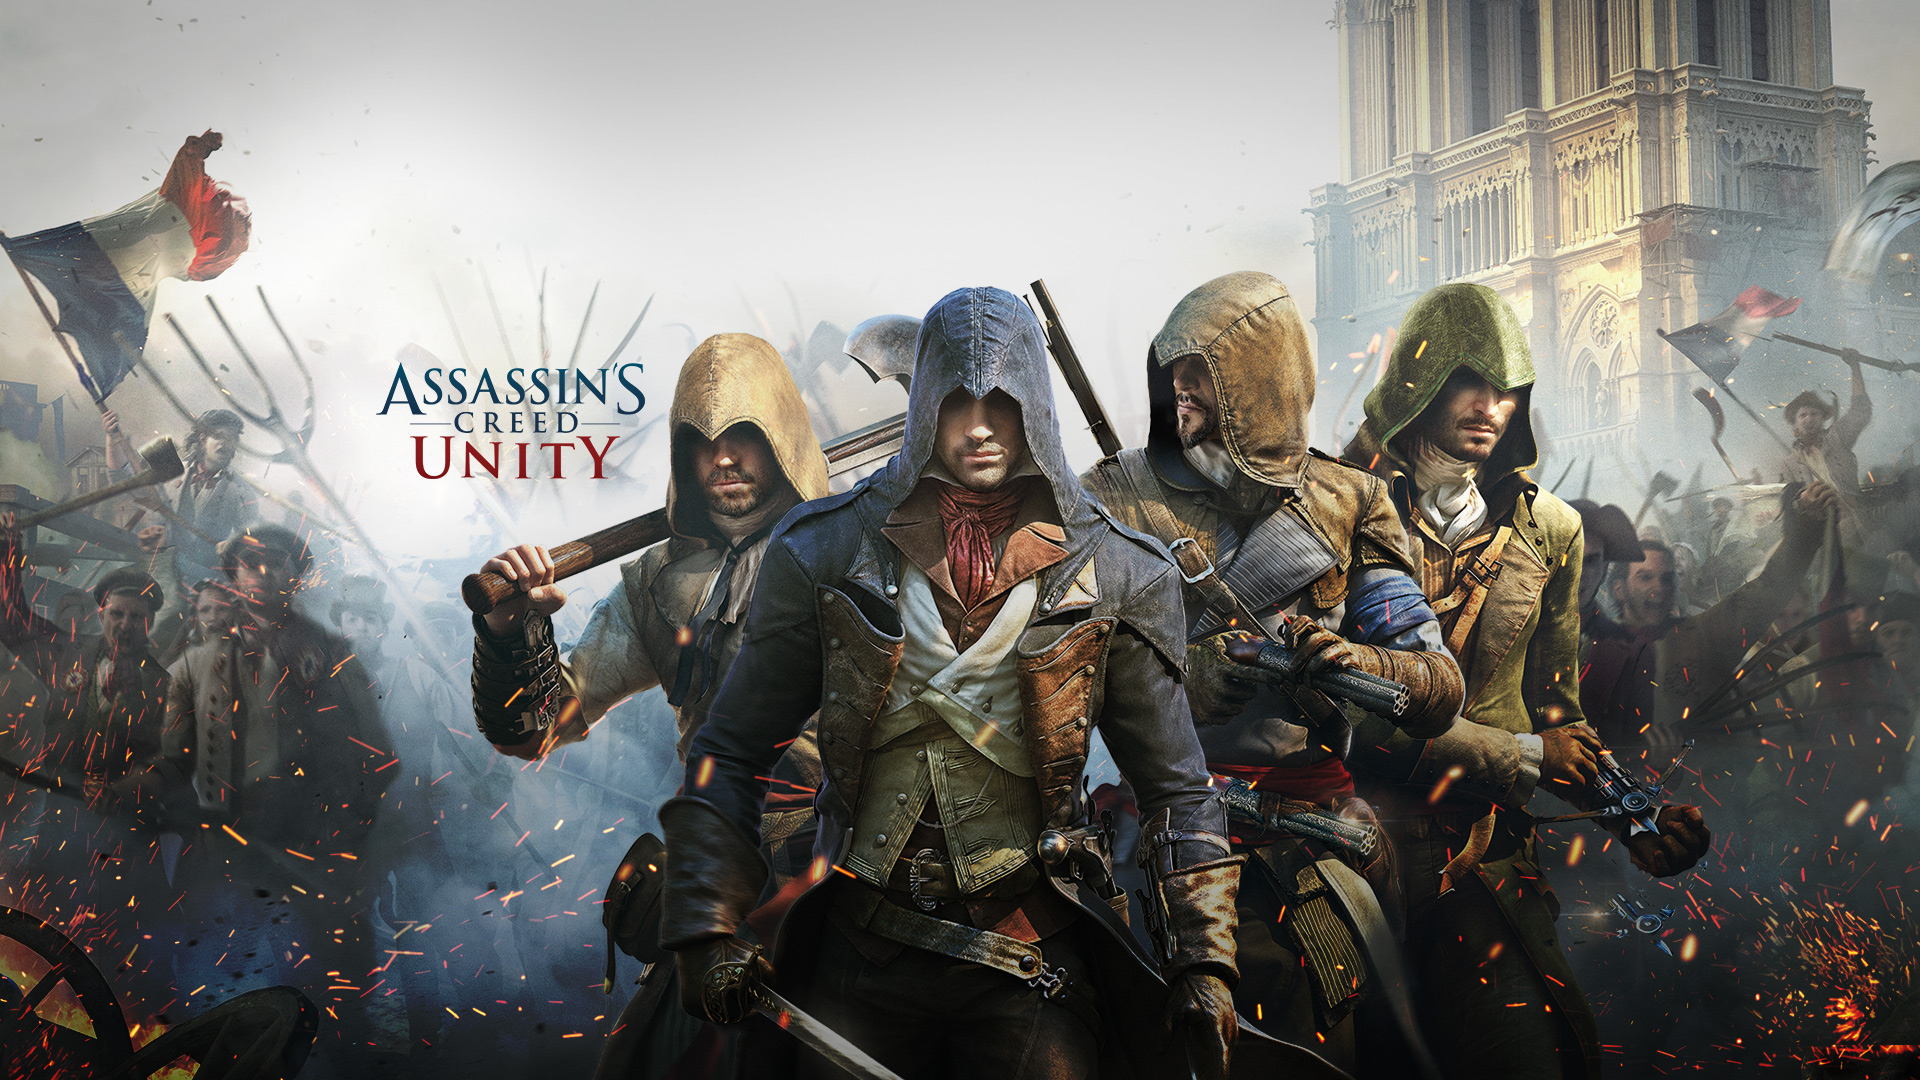 Assassin's Creed III - Multiplayer Characters / Characters - TV Tropes